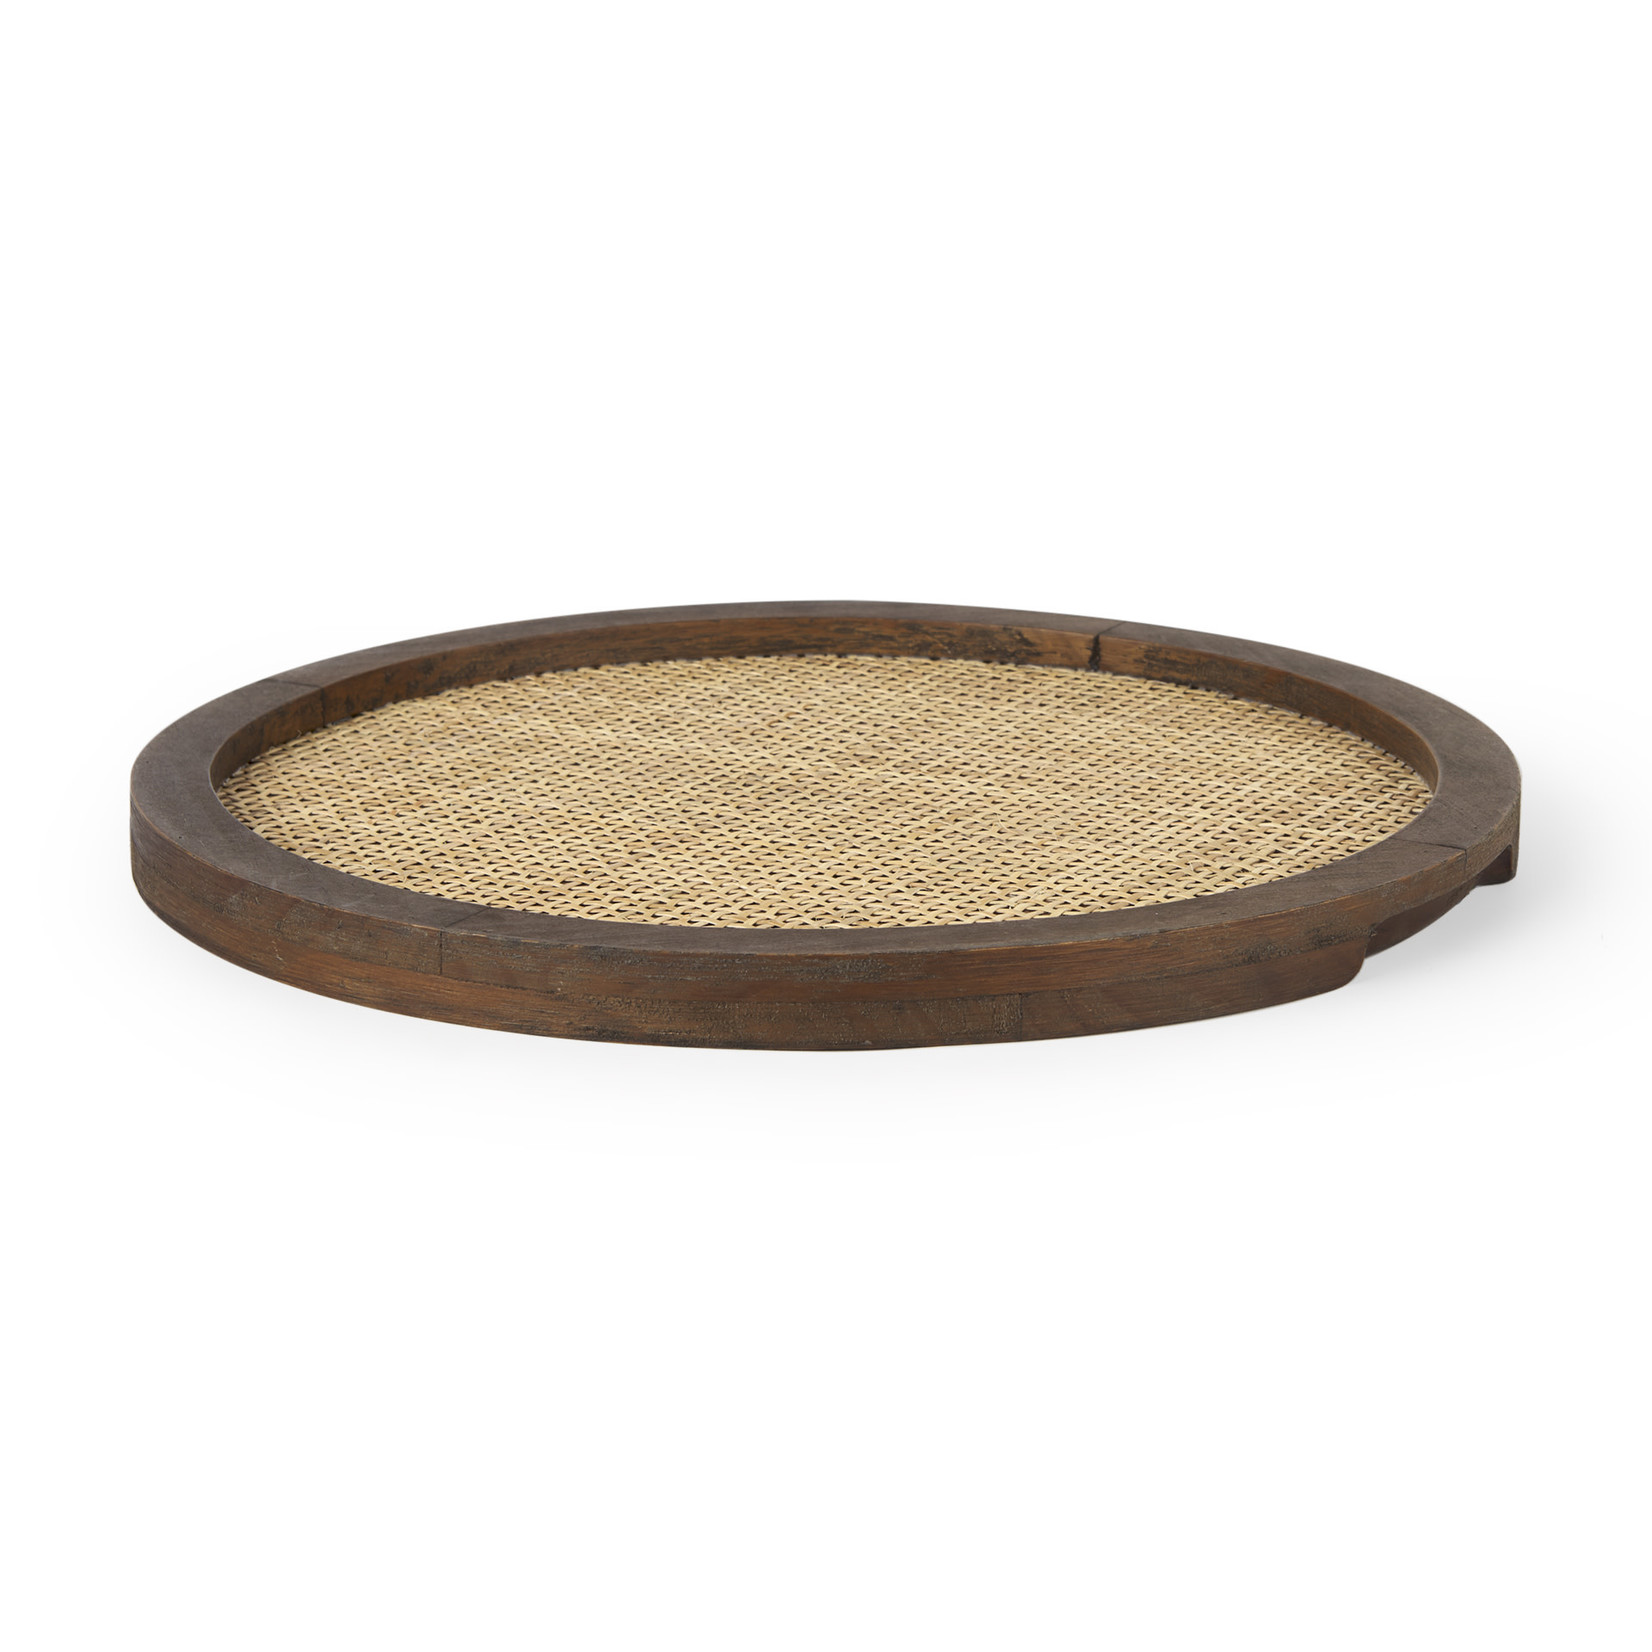 Silas Cane and Wood Round Tray